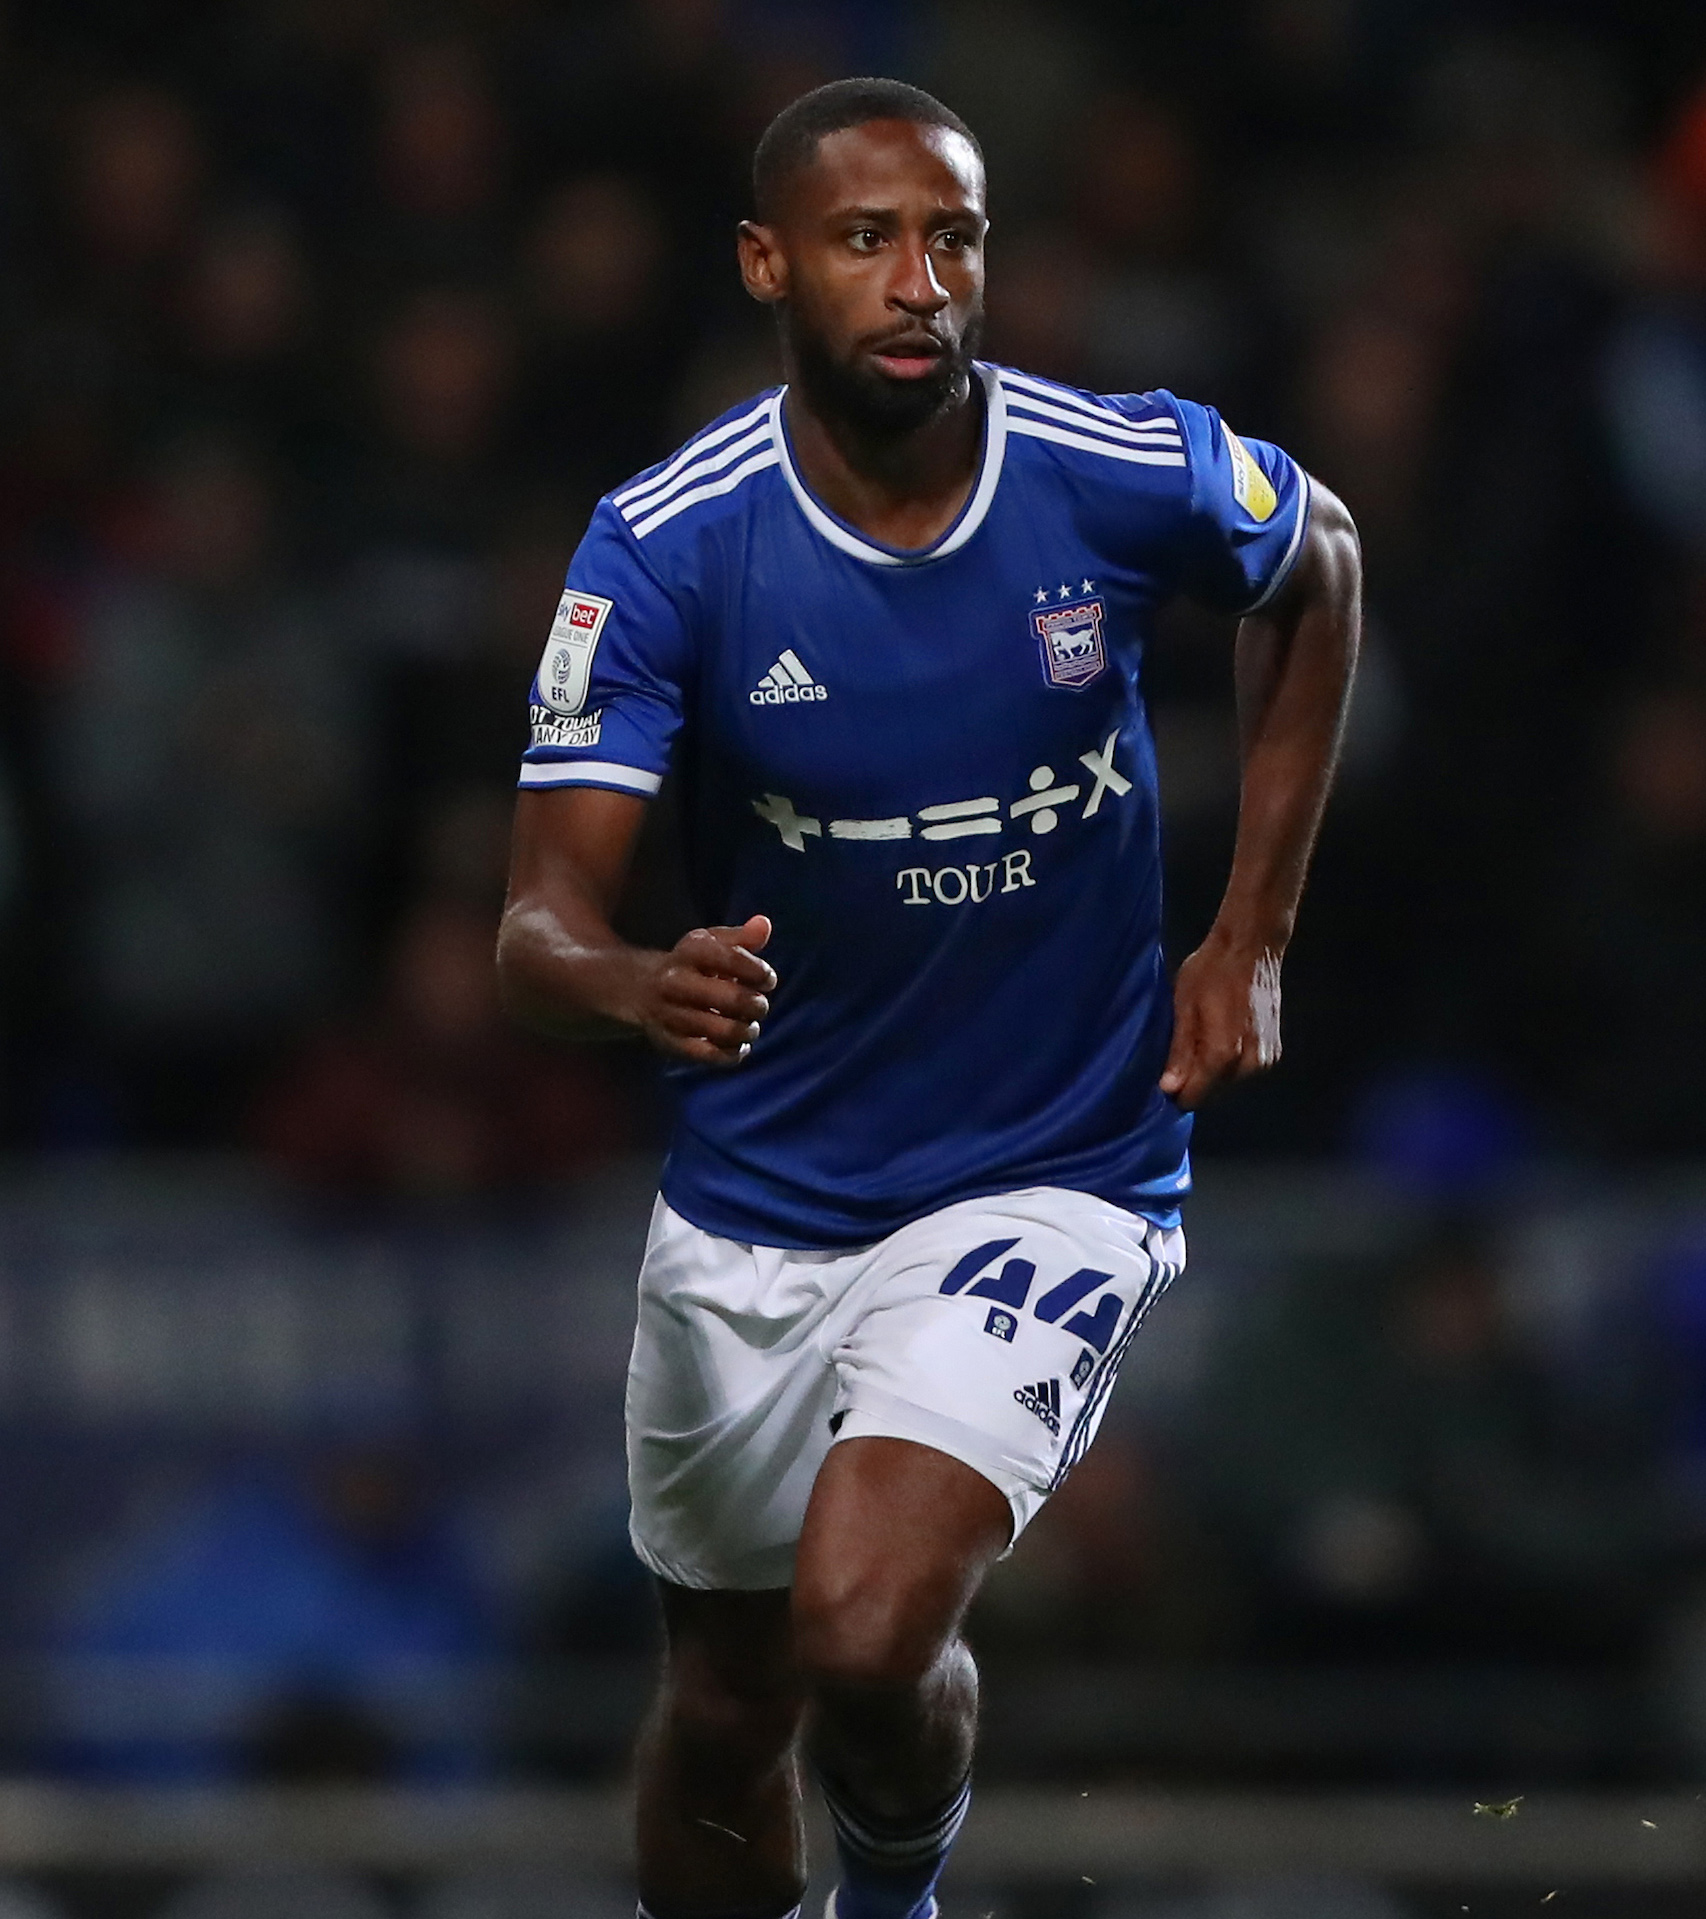 Ipswich Town on X: "Janoi Donacien and Wes Burns miss out this afternoon through illness. #itfc https://t.co/3RqKI2iFH0" / X